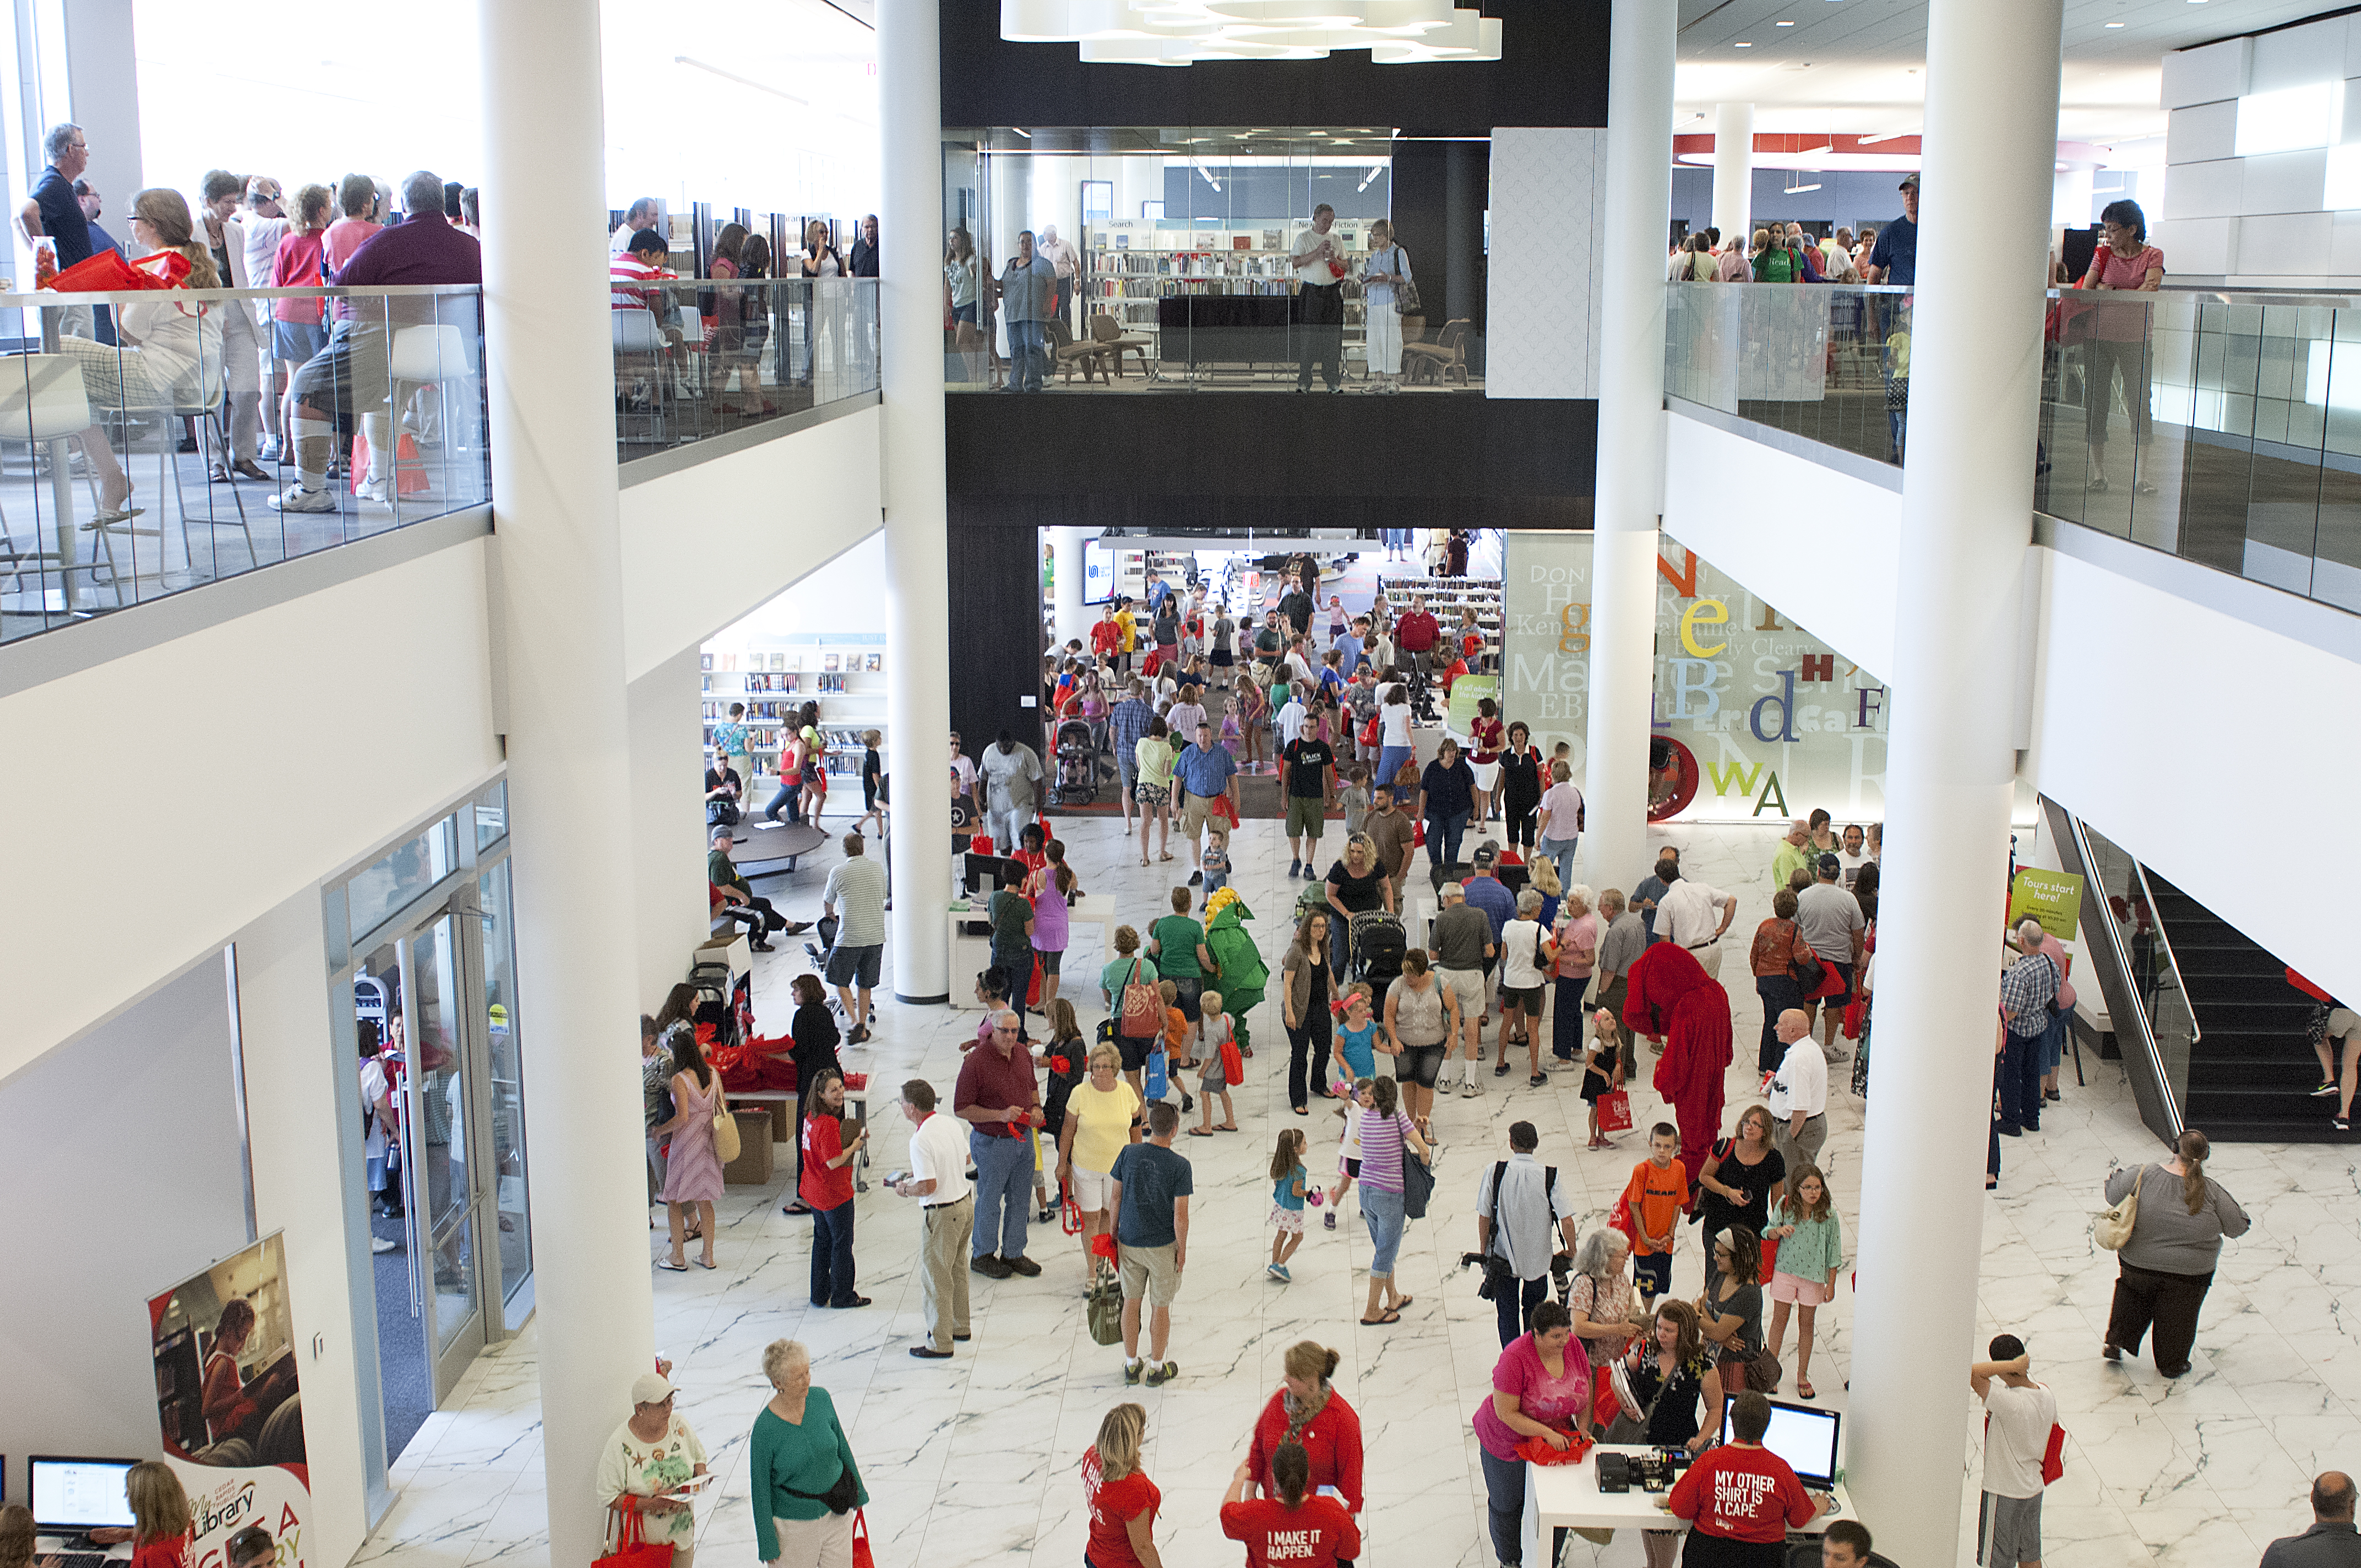 Downtown Library commons during opening day with a crowd full of people